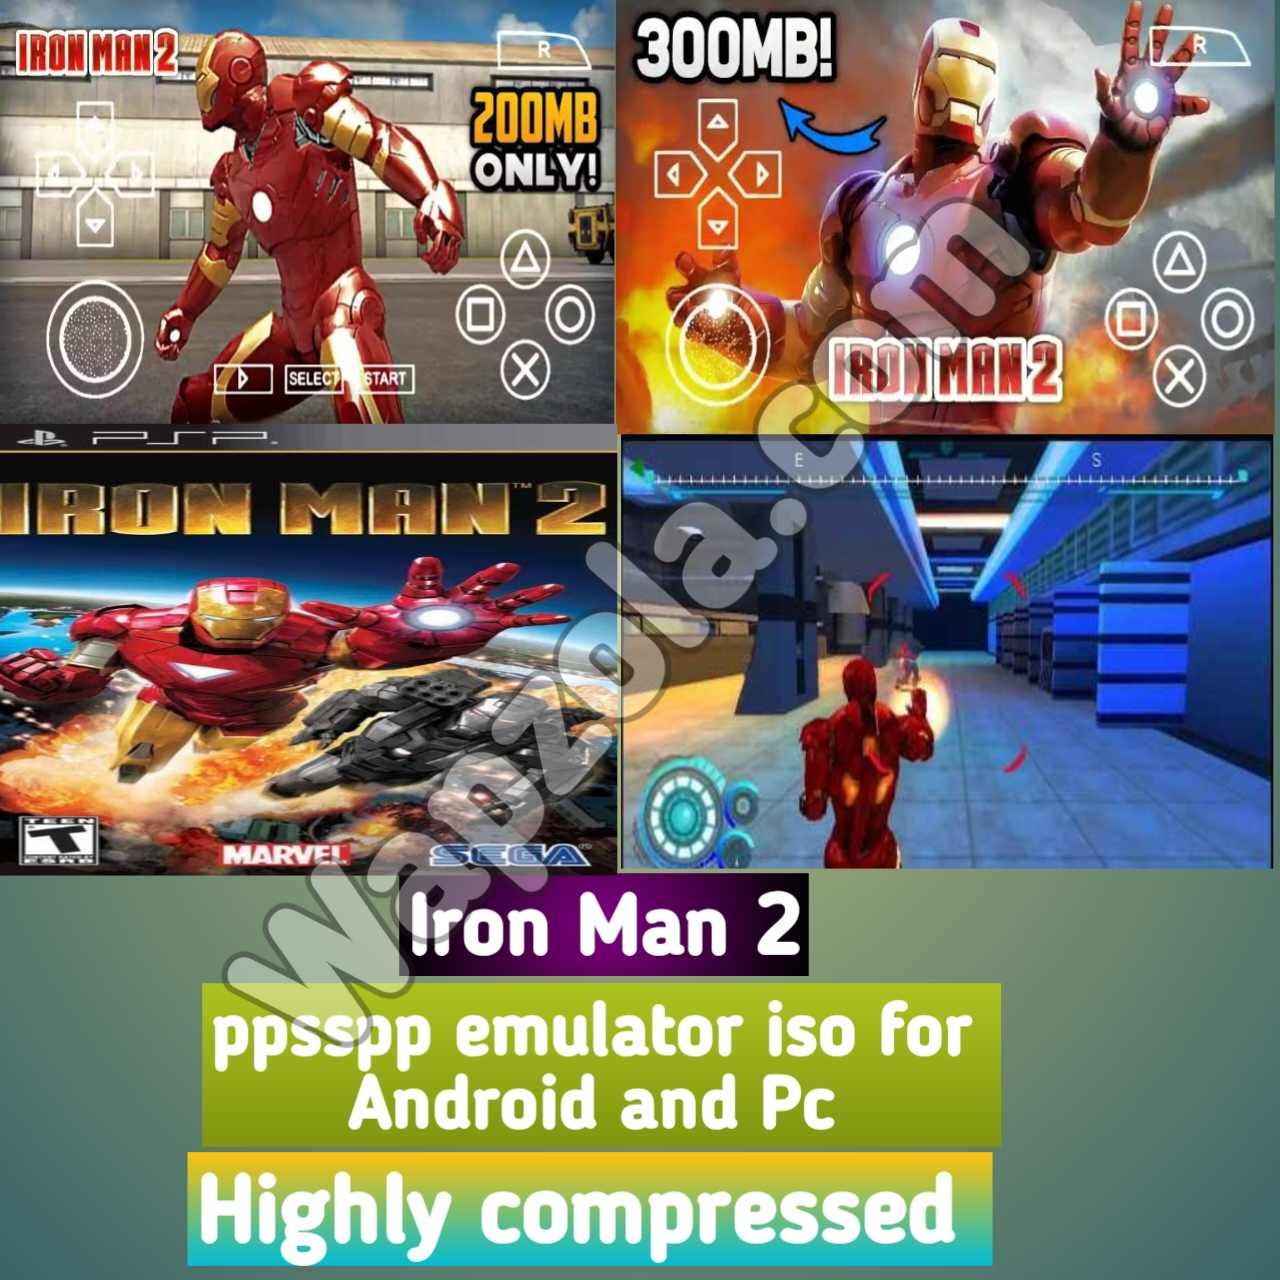 You are currently viewing [Download] Iron Man 2 ppsspp emulator – PSP APK Iso highly compressed 200MB